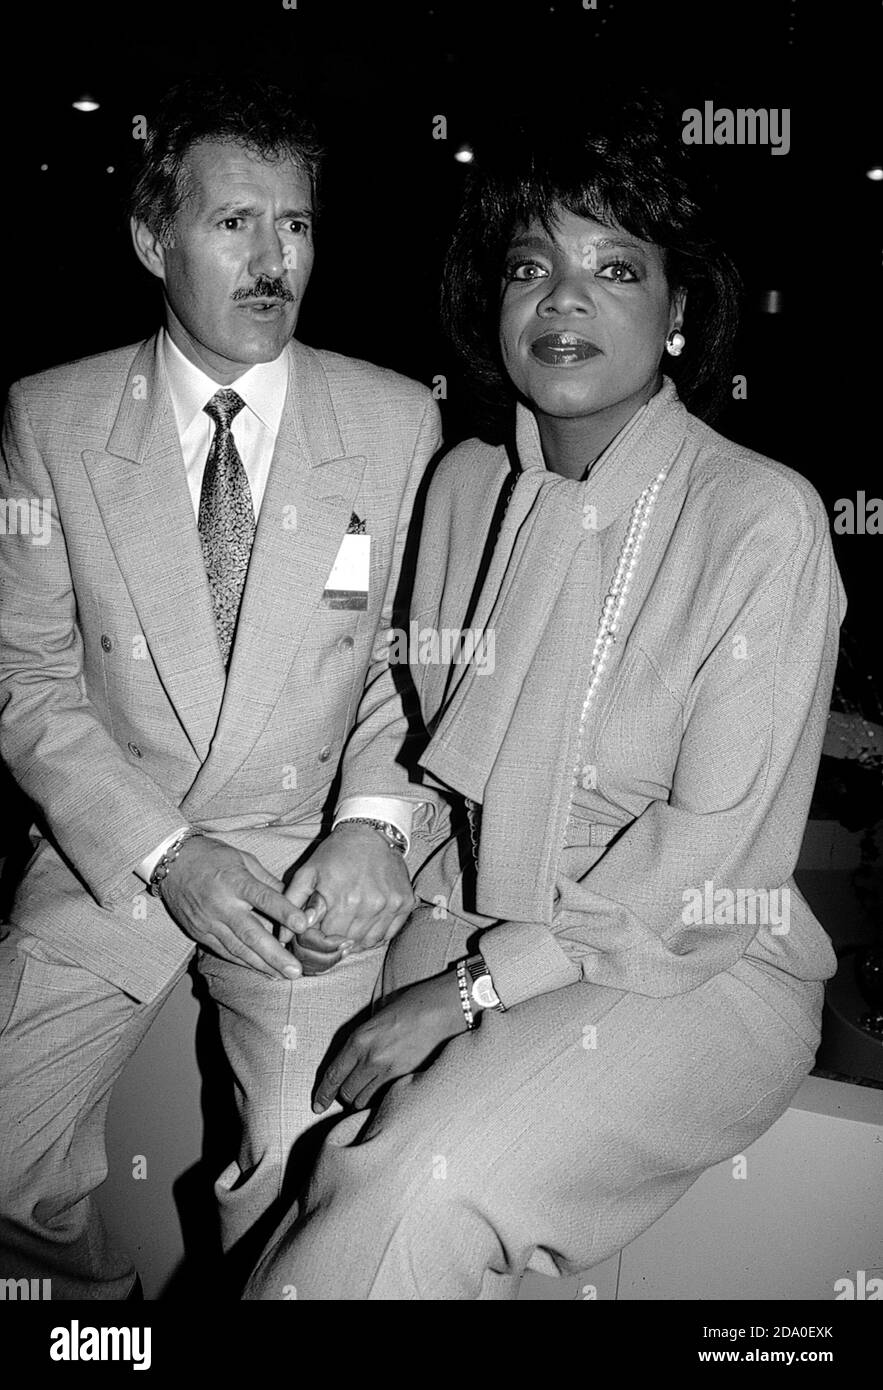 **FILE PHOTO** Alex Trebek Has Passed Away. Oprah Winfrey and Alex Trebek Attending the N.A.T.P.E. TV Convention in New Orleans. January 1990 Credit: Walter McBride/MediaPunch Stock Photo